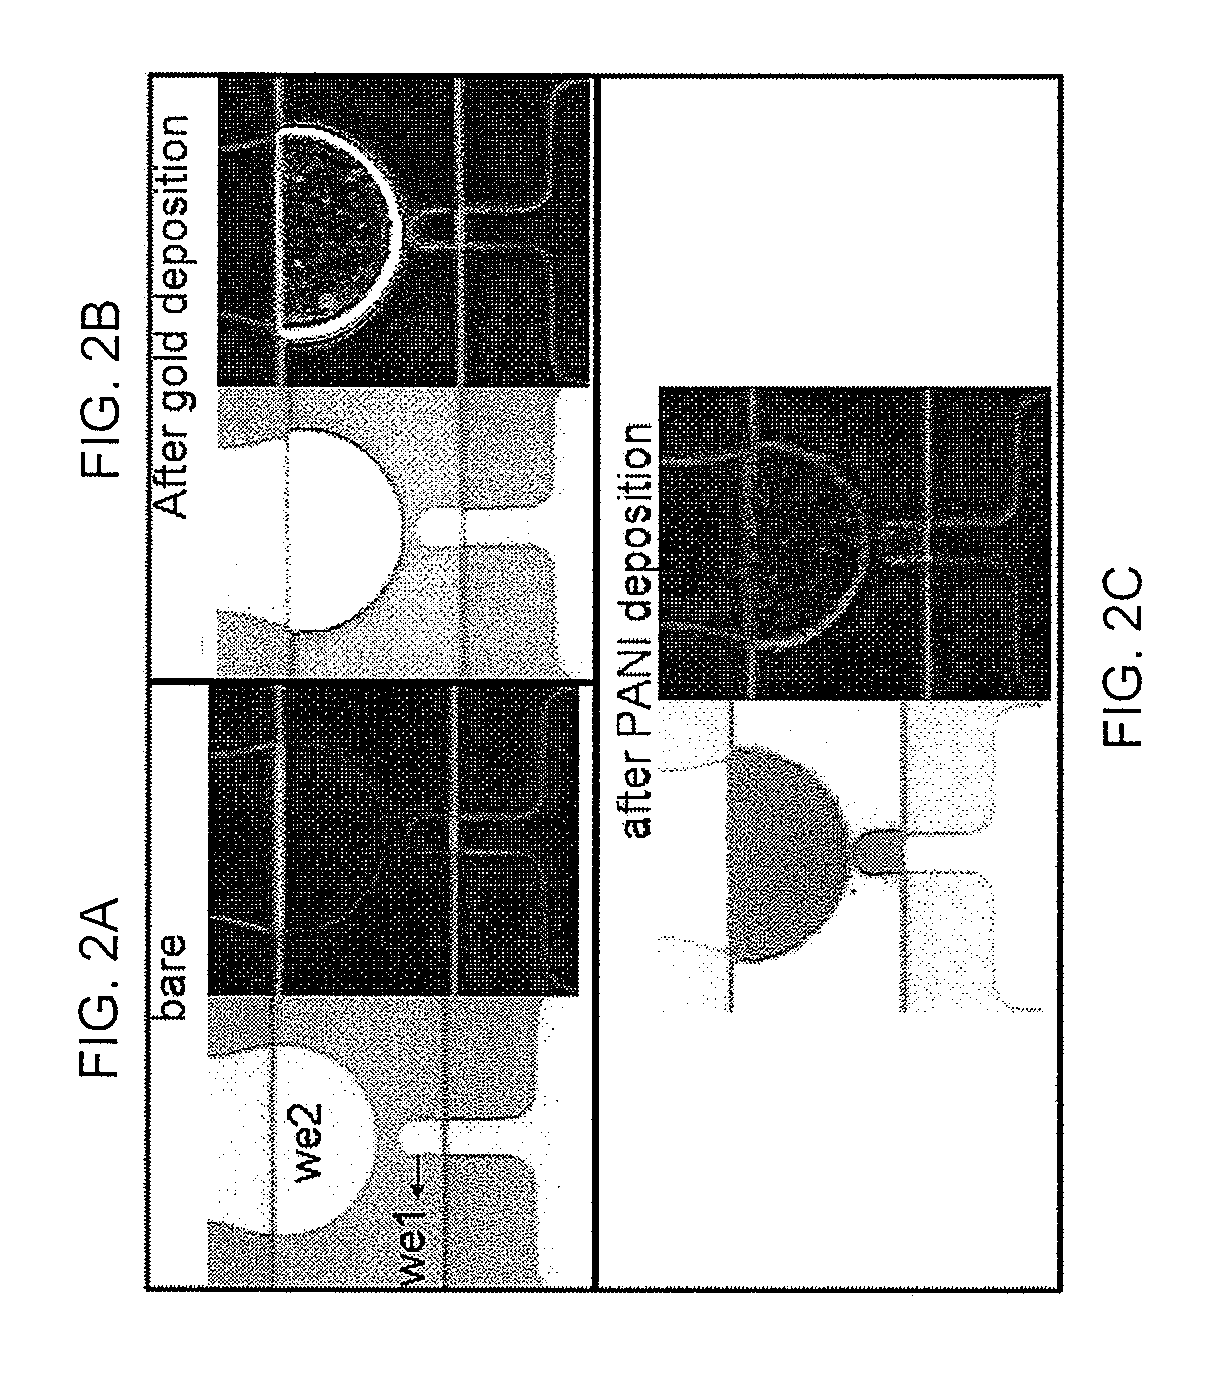 Systems and methods for integrated electrochemical and electrical detection